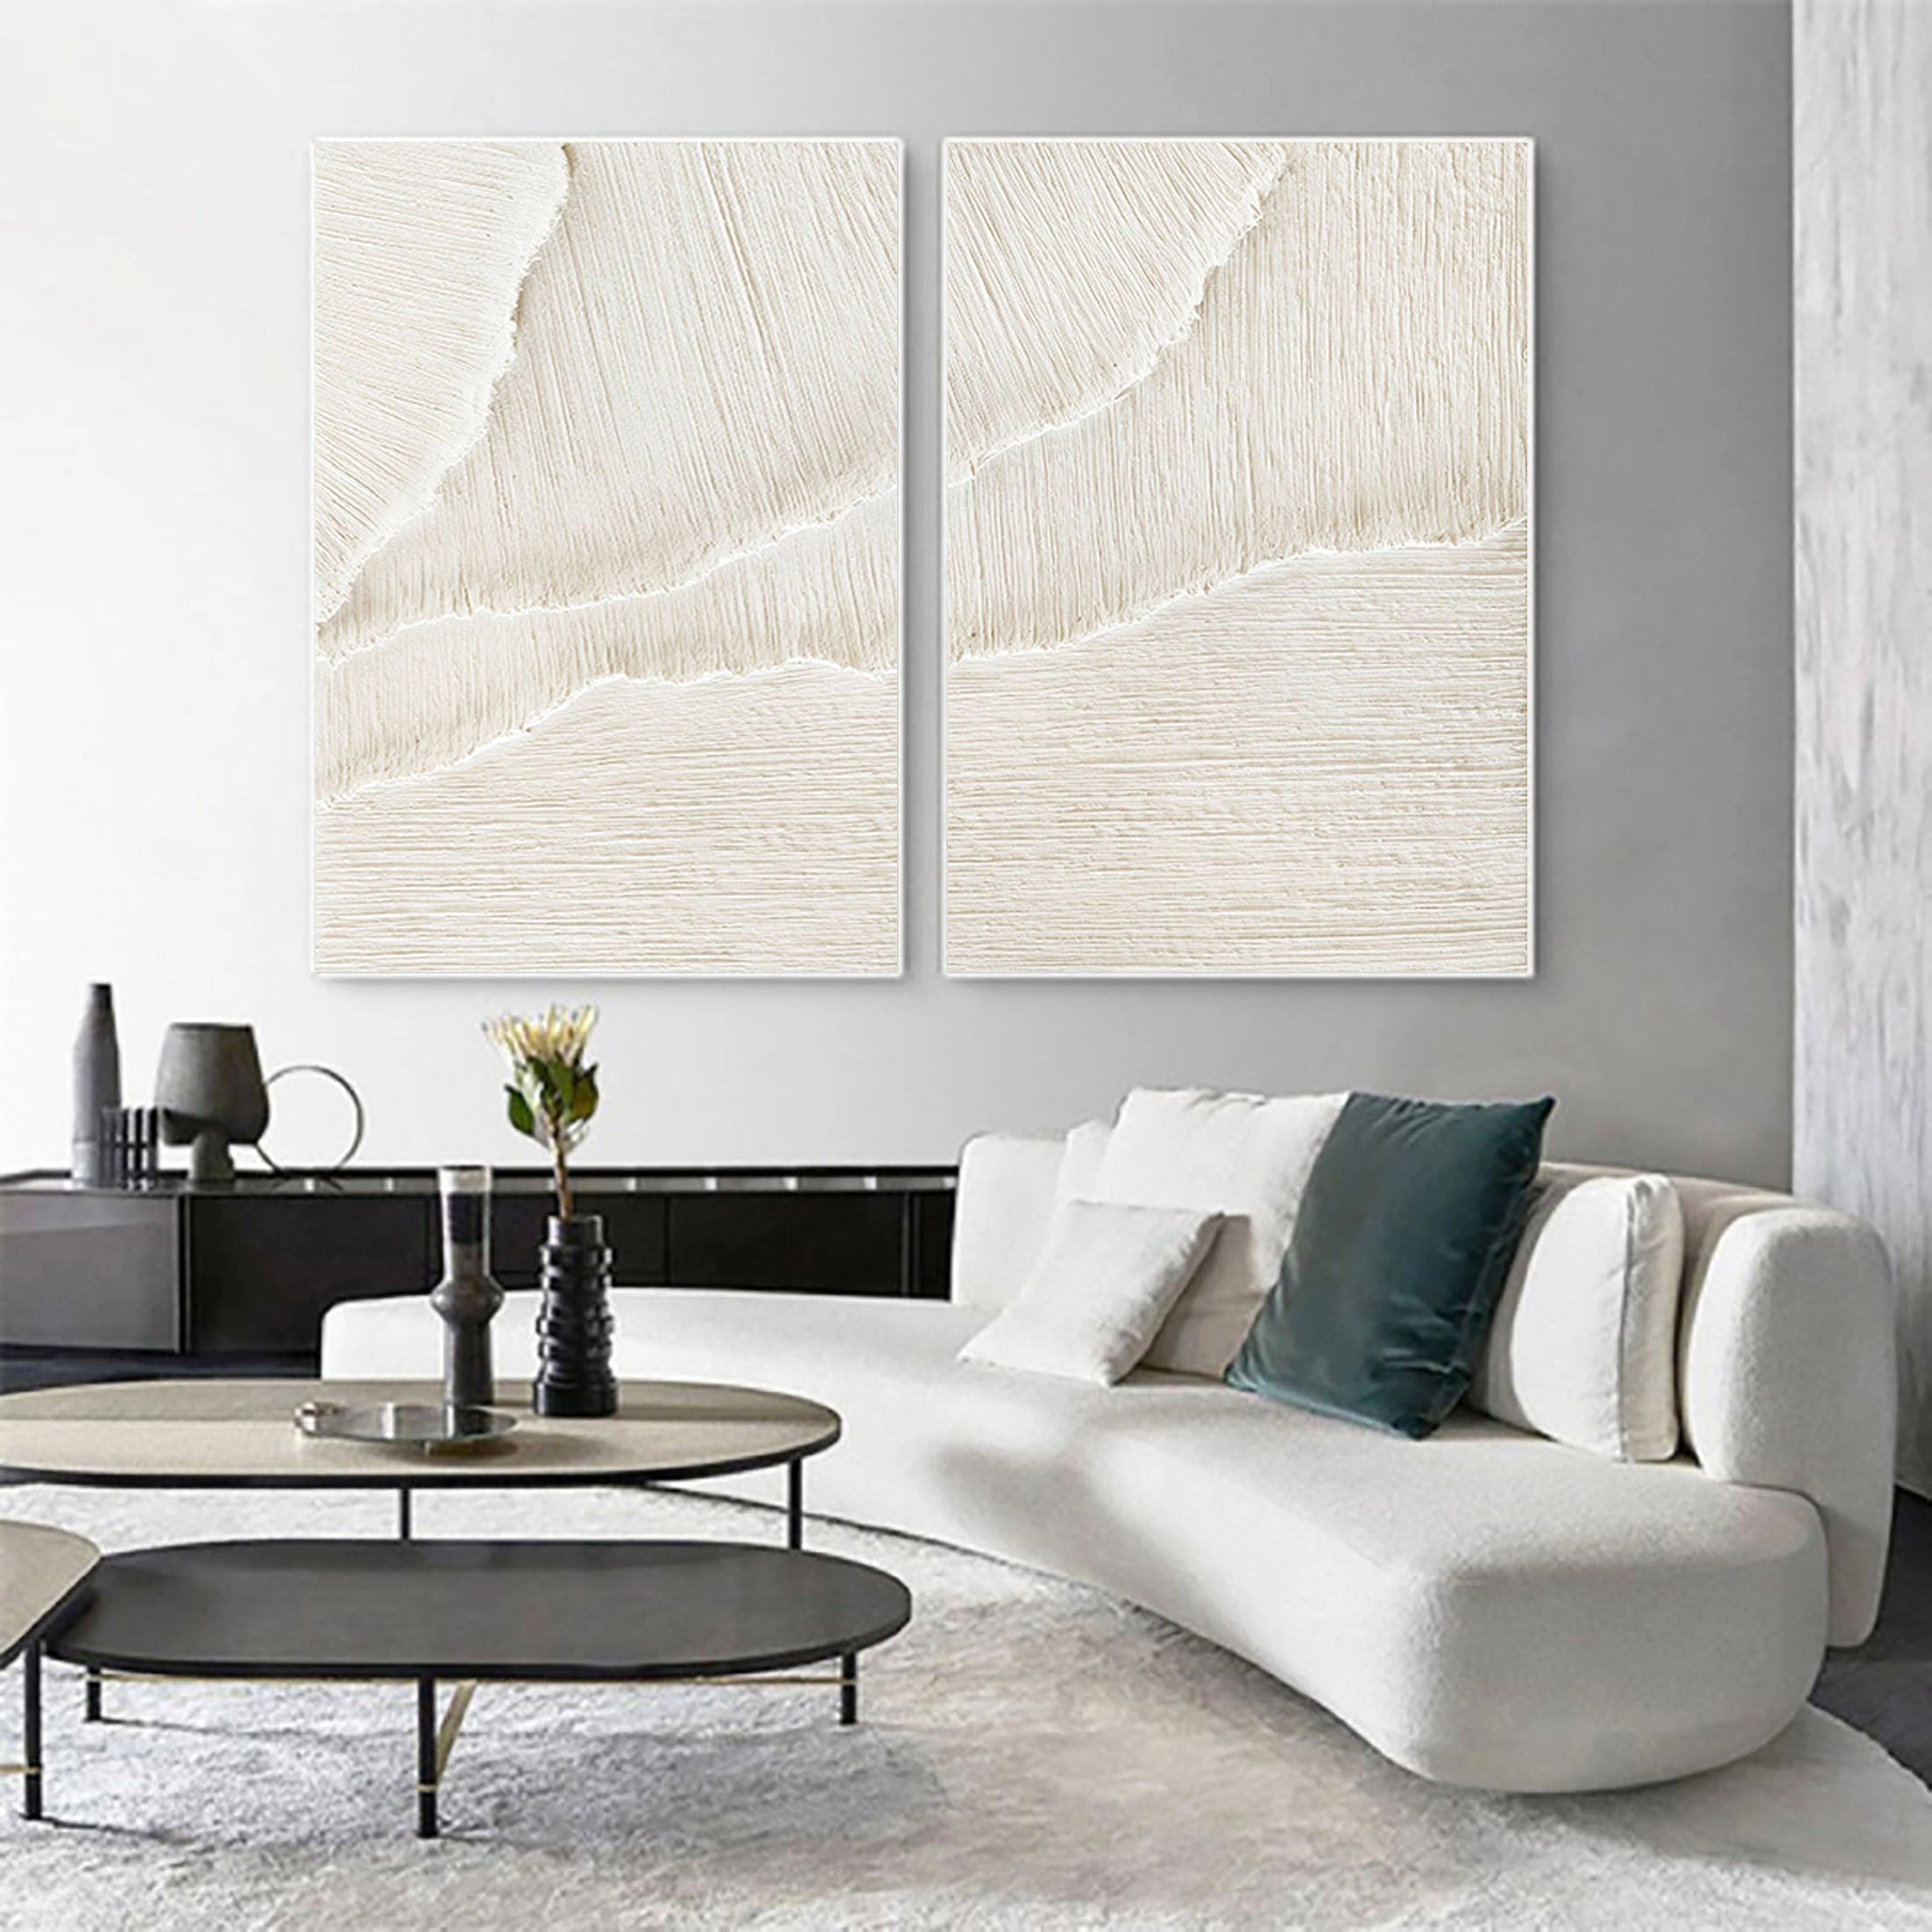 Set of 2 Minimalistic White Plaster Large Painting for Home Decor